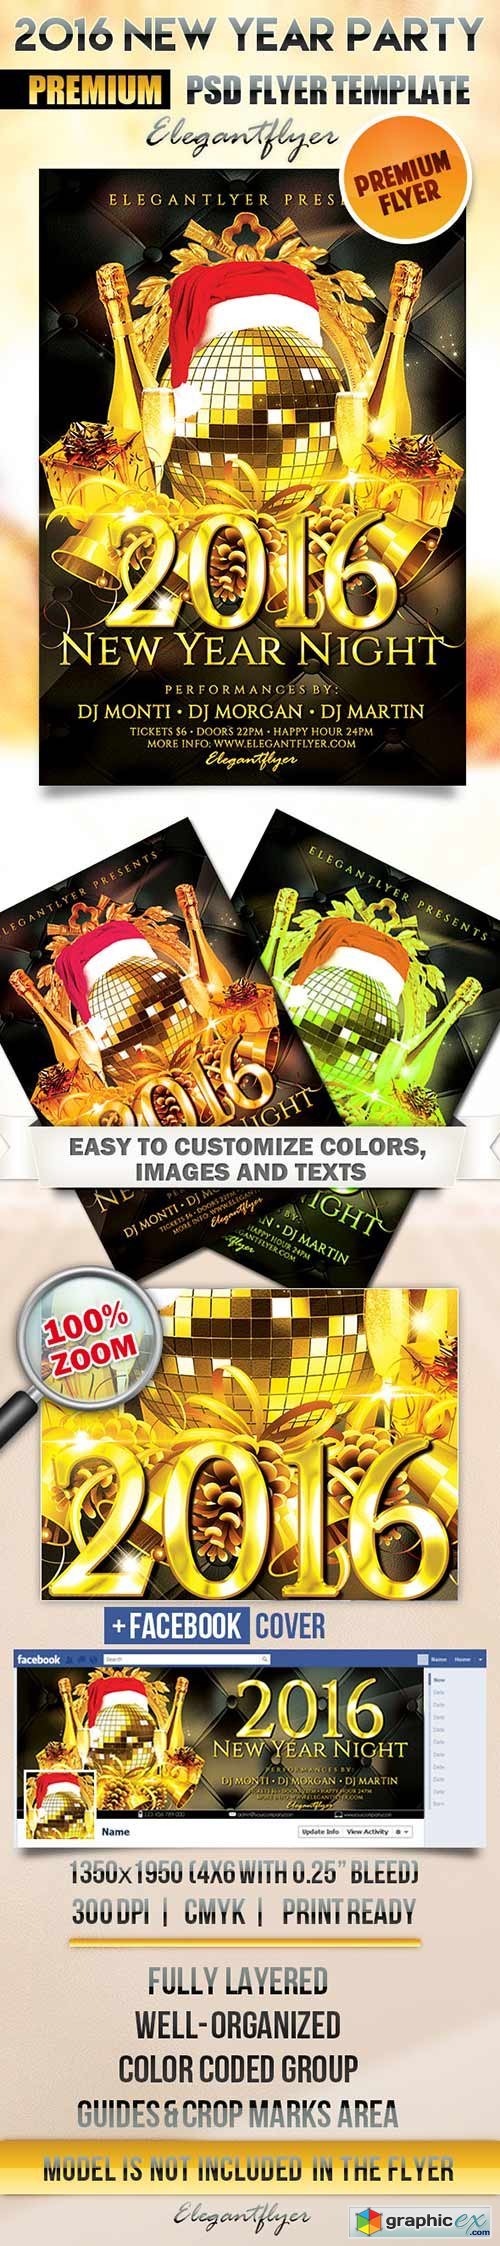 2016 New Year Party Flyer PSD Template + Facebook Cover